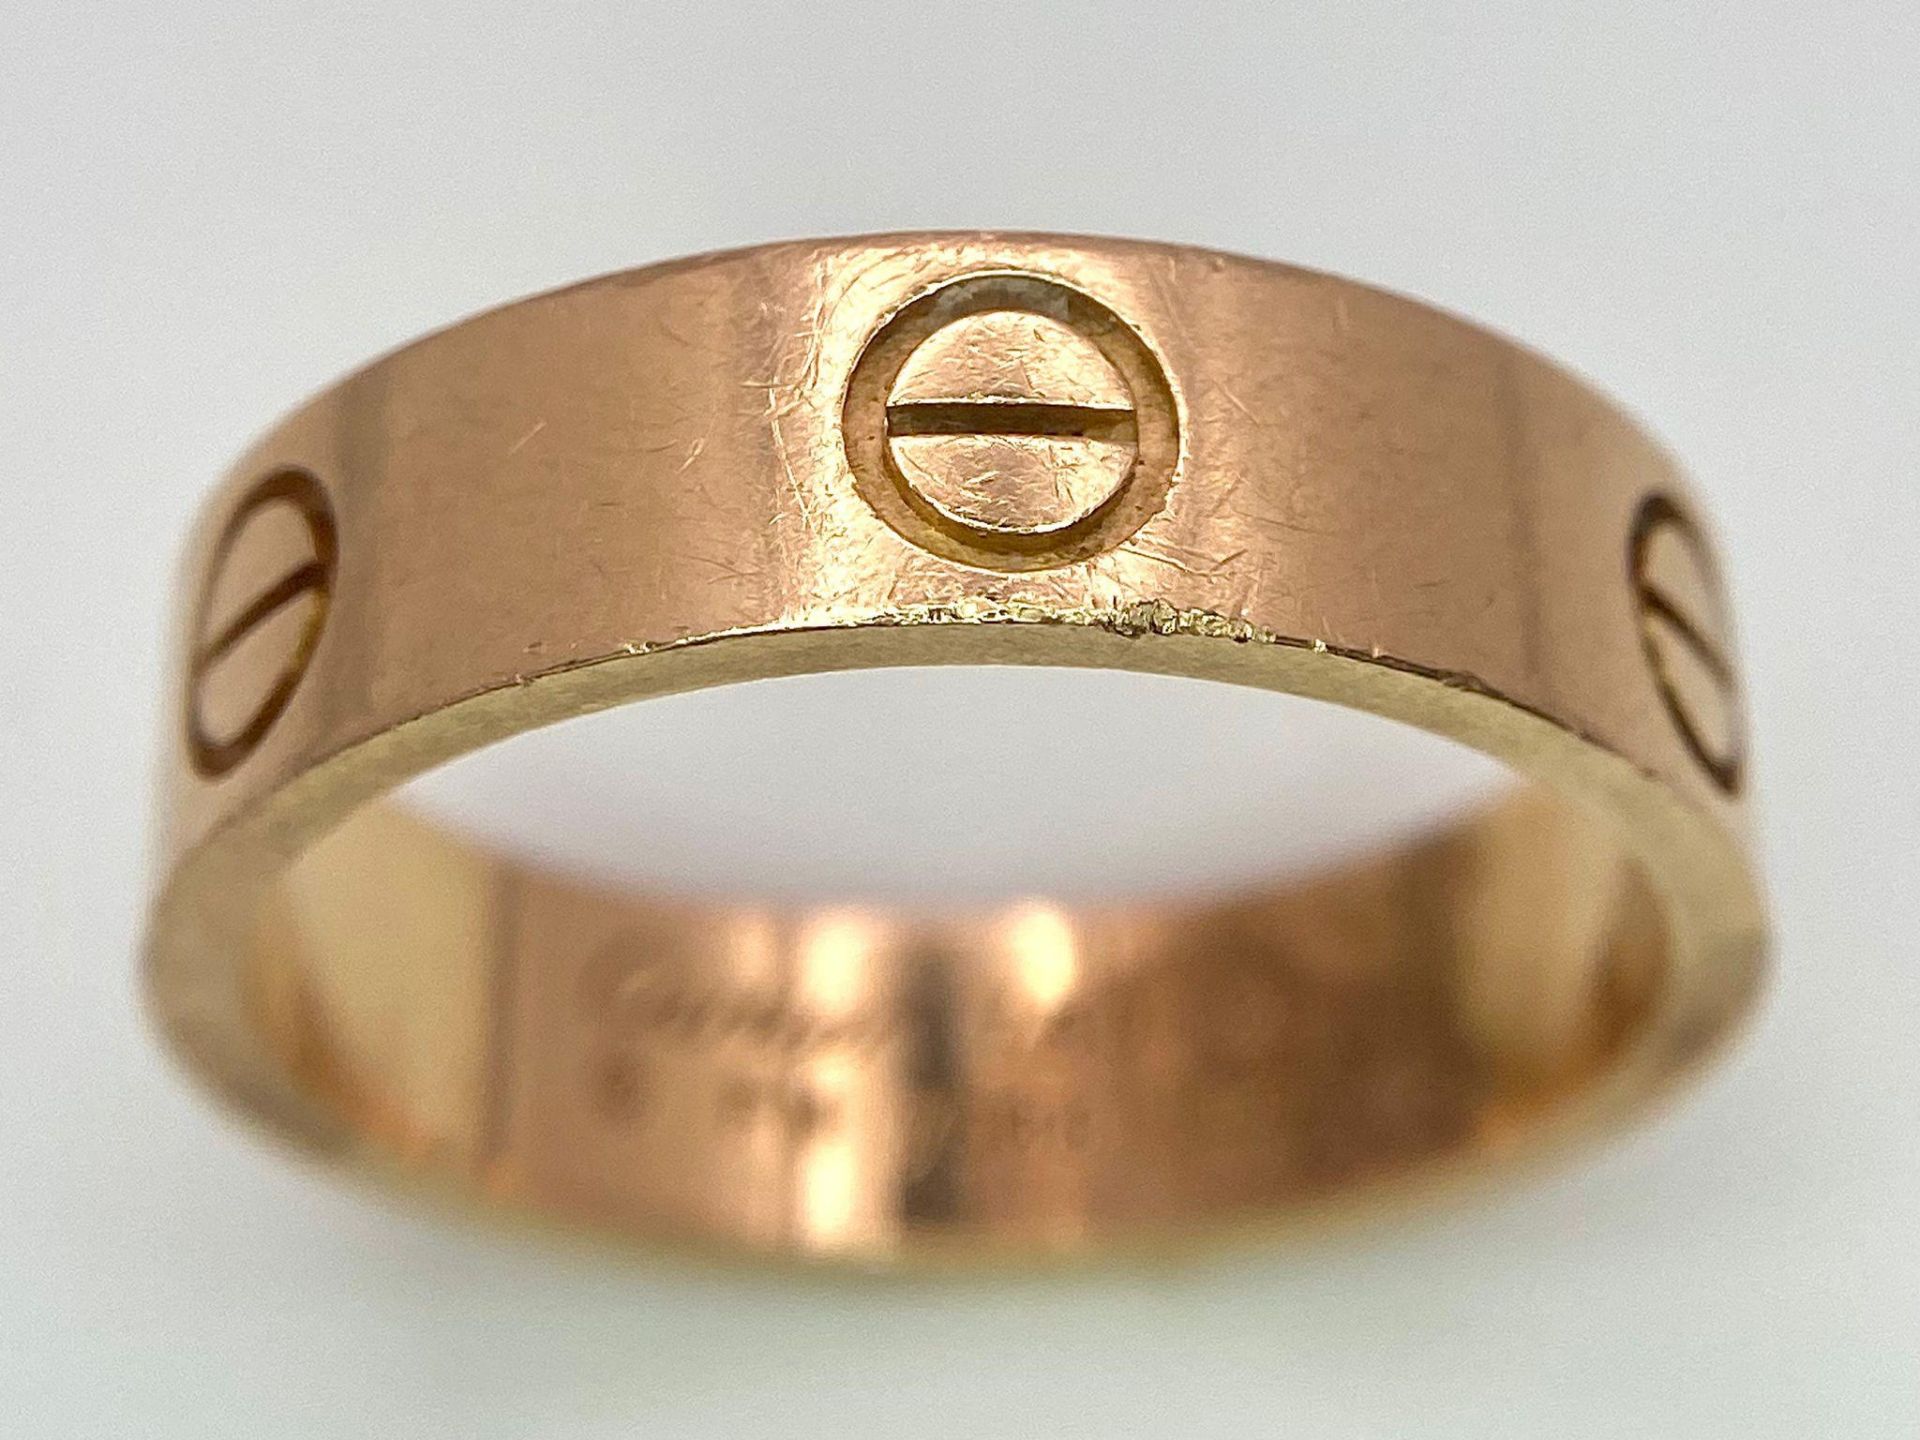 A Cartier 18K Rose Gold Love Band Gents Ring. 6mm width. Cartier hallmarks. Size W. 8.6g weight. - Image 2 of 9